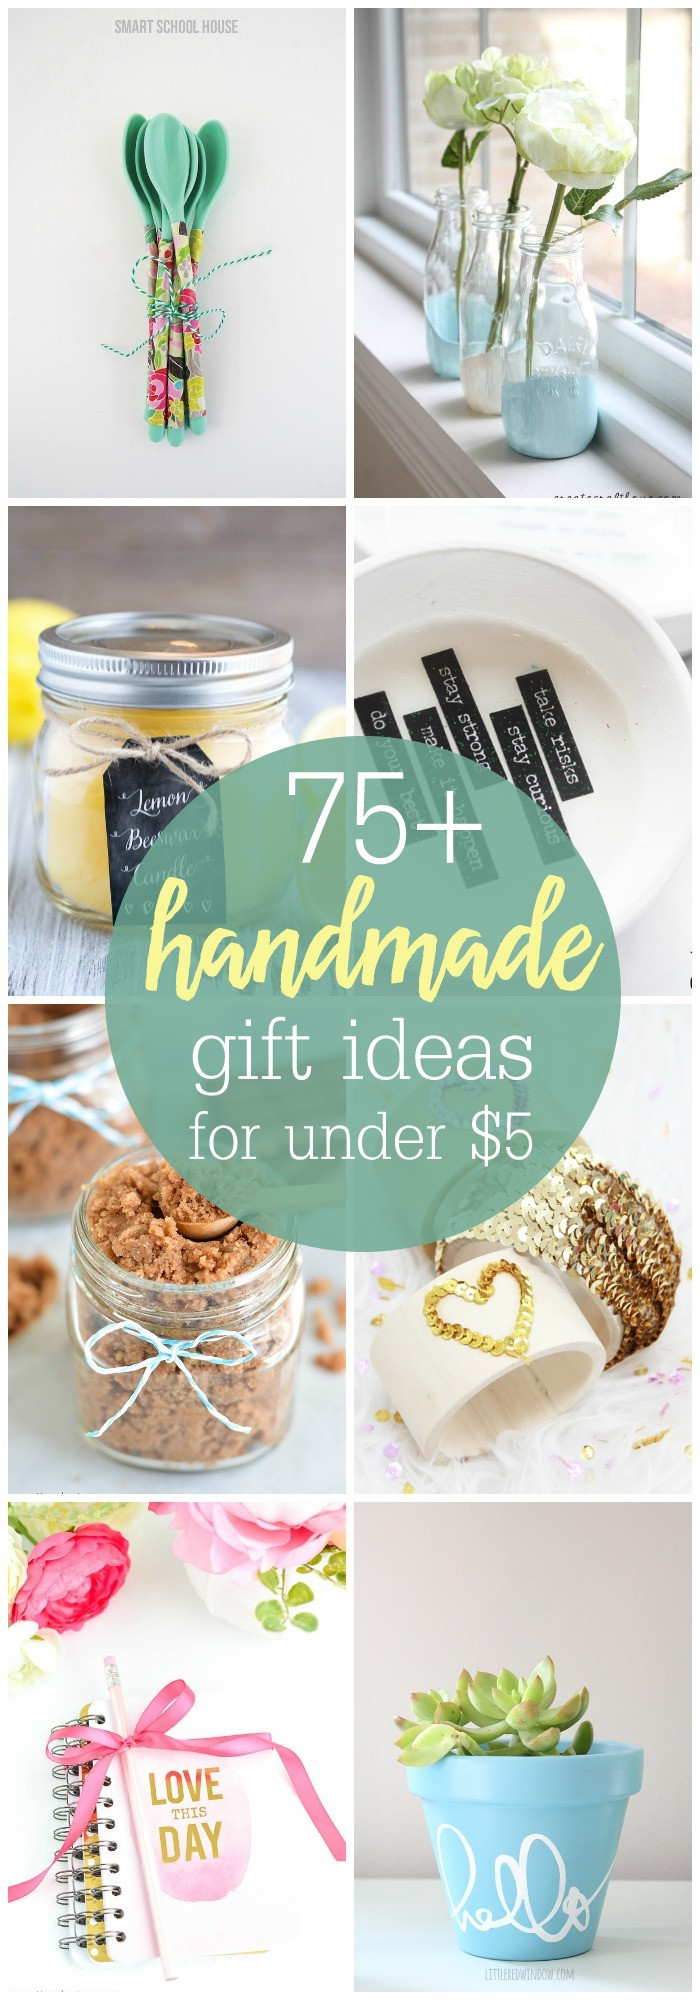 Christmas Gift Ideas Under $5
 The top 20 Ideas About Christmas Gift Ideas Under $5